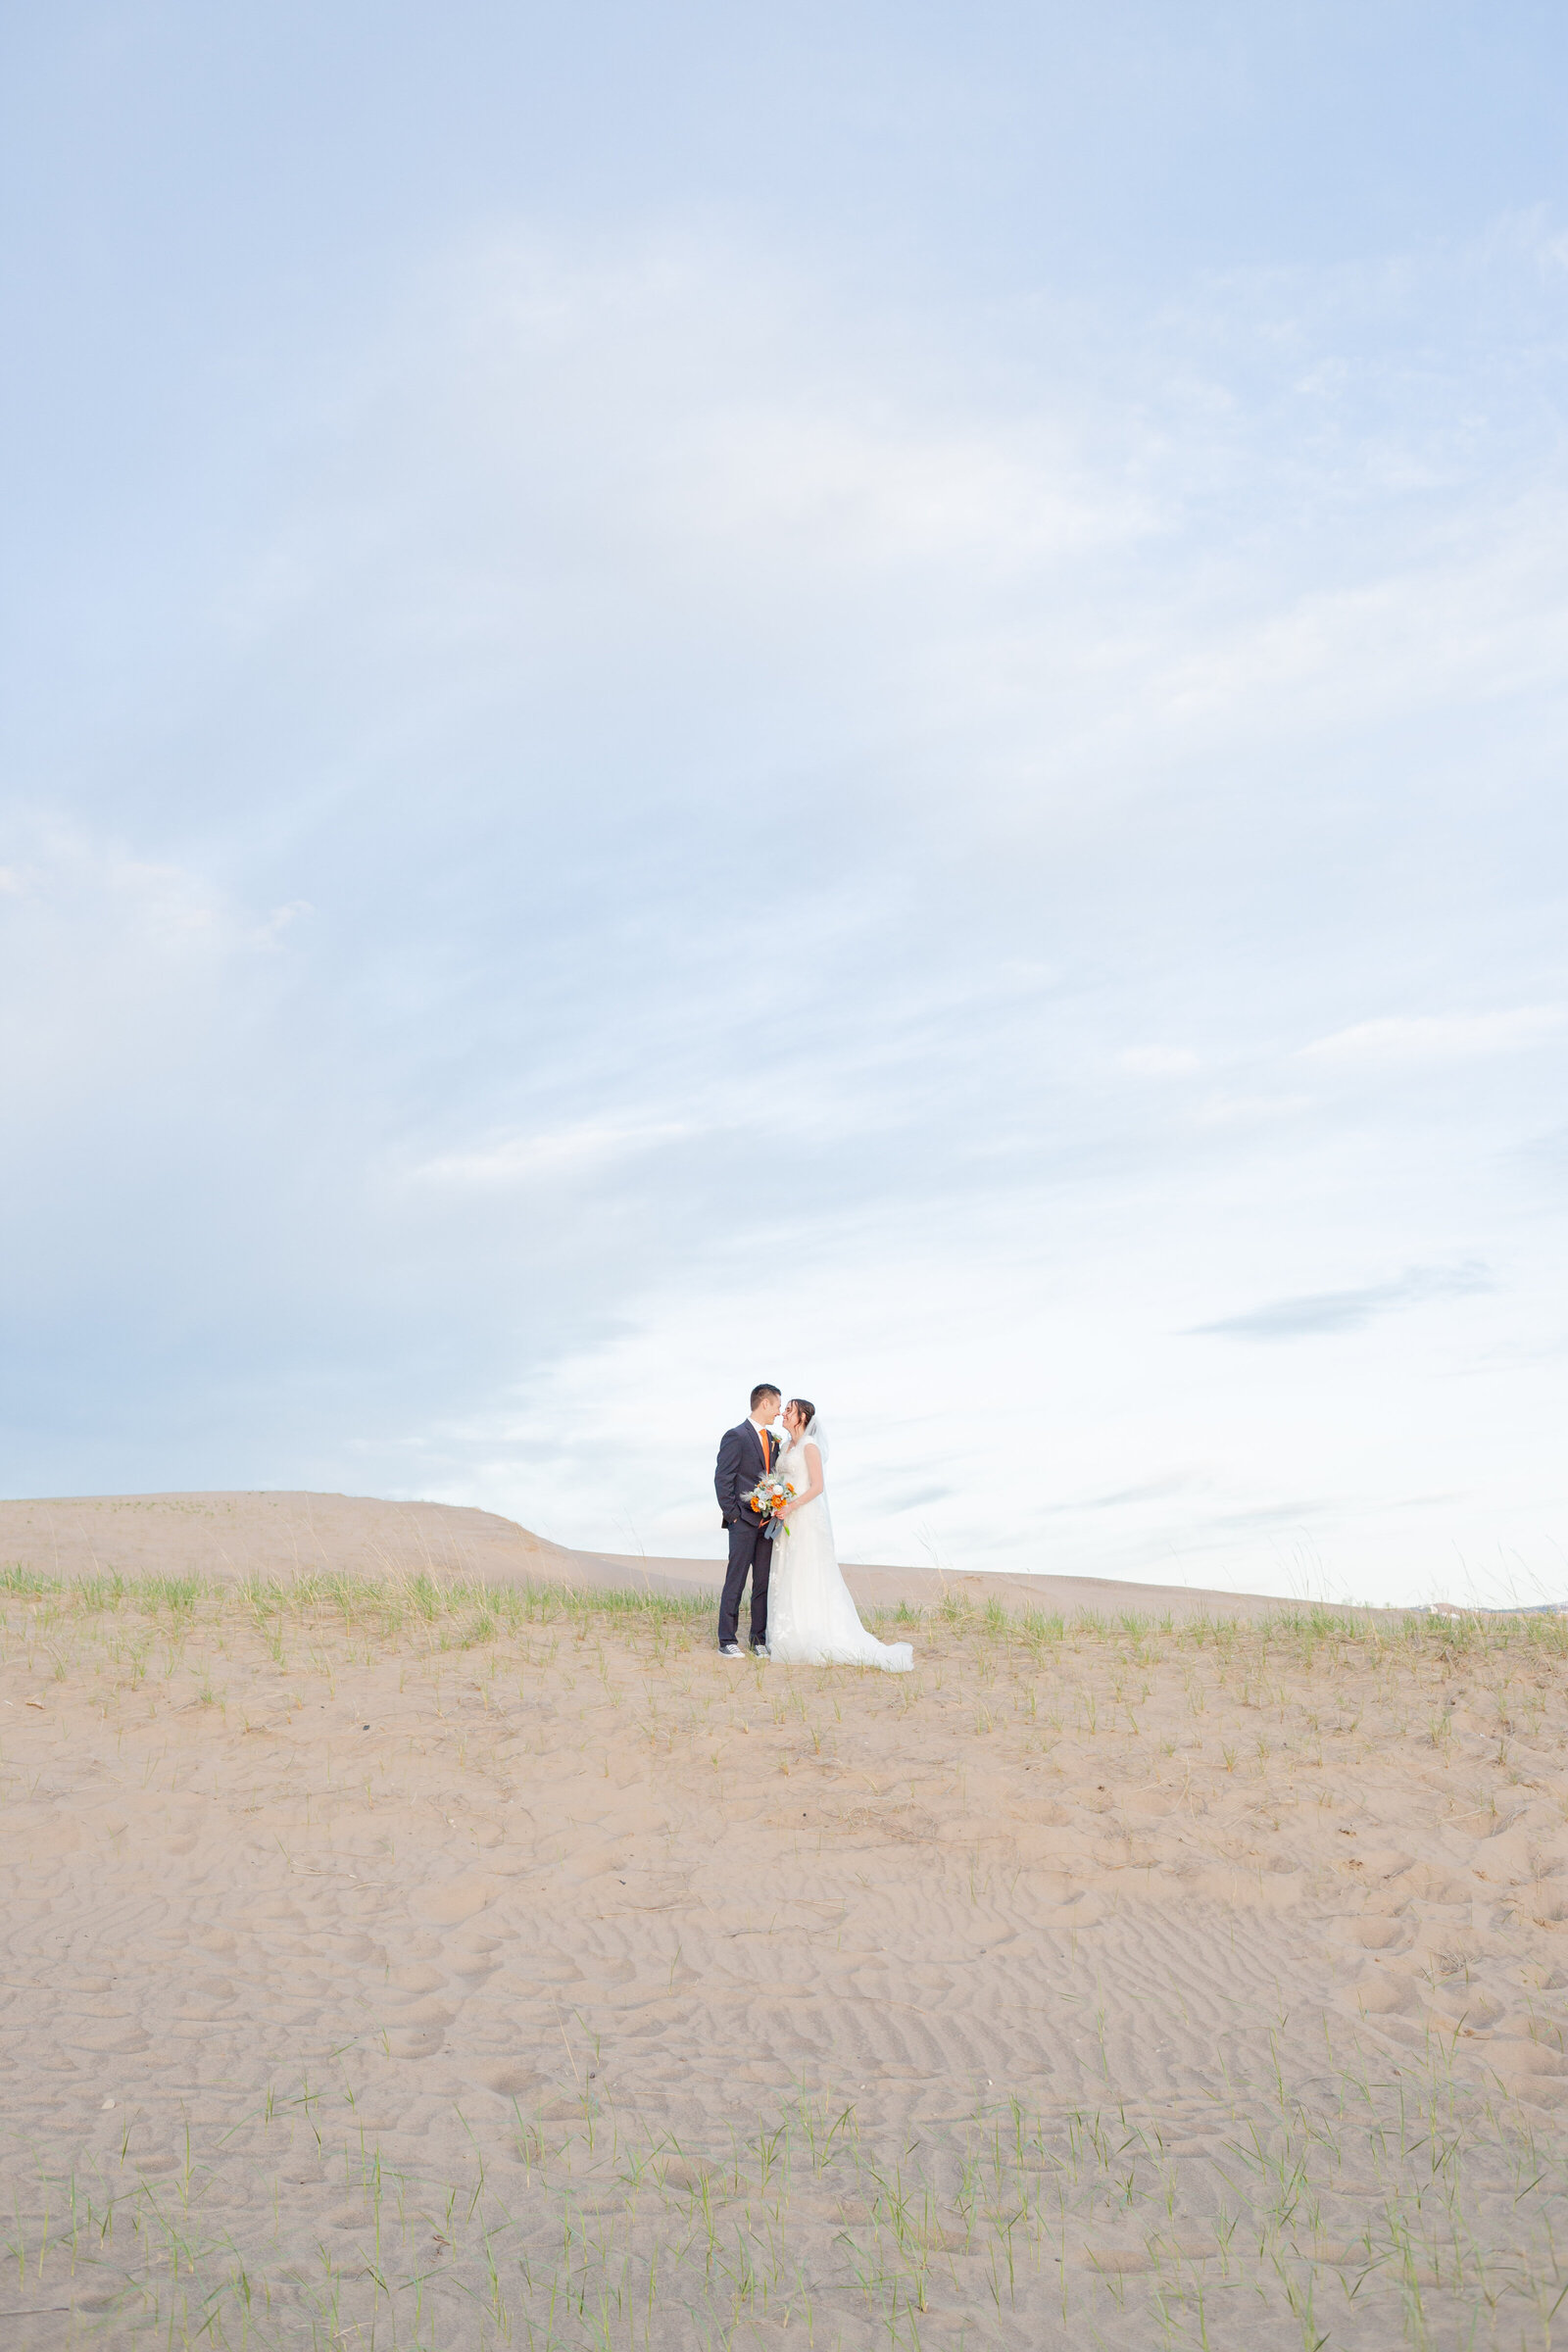 Idaho Falls Photographers capture mountain bridals with couple embracing